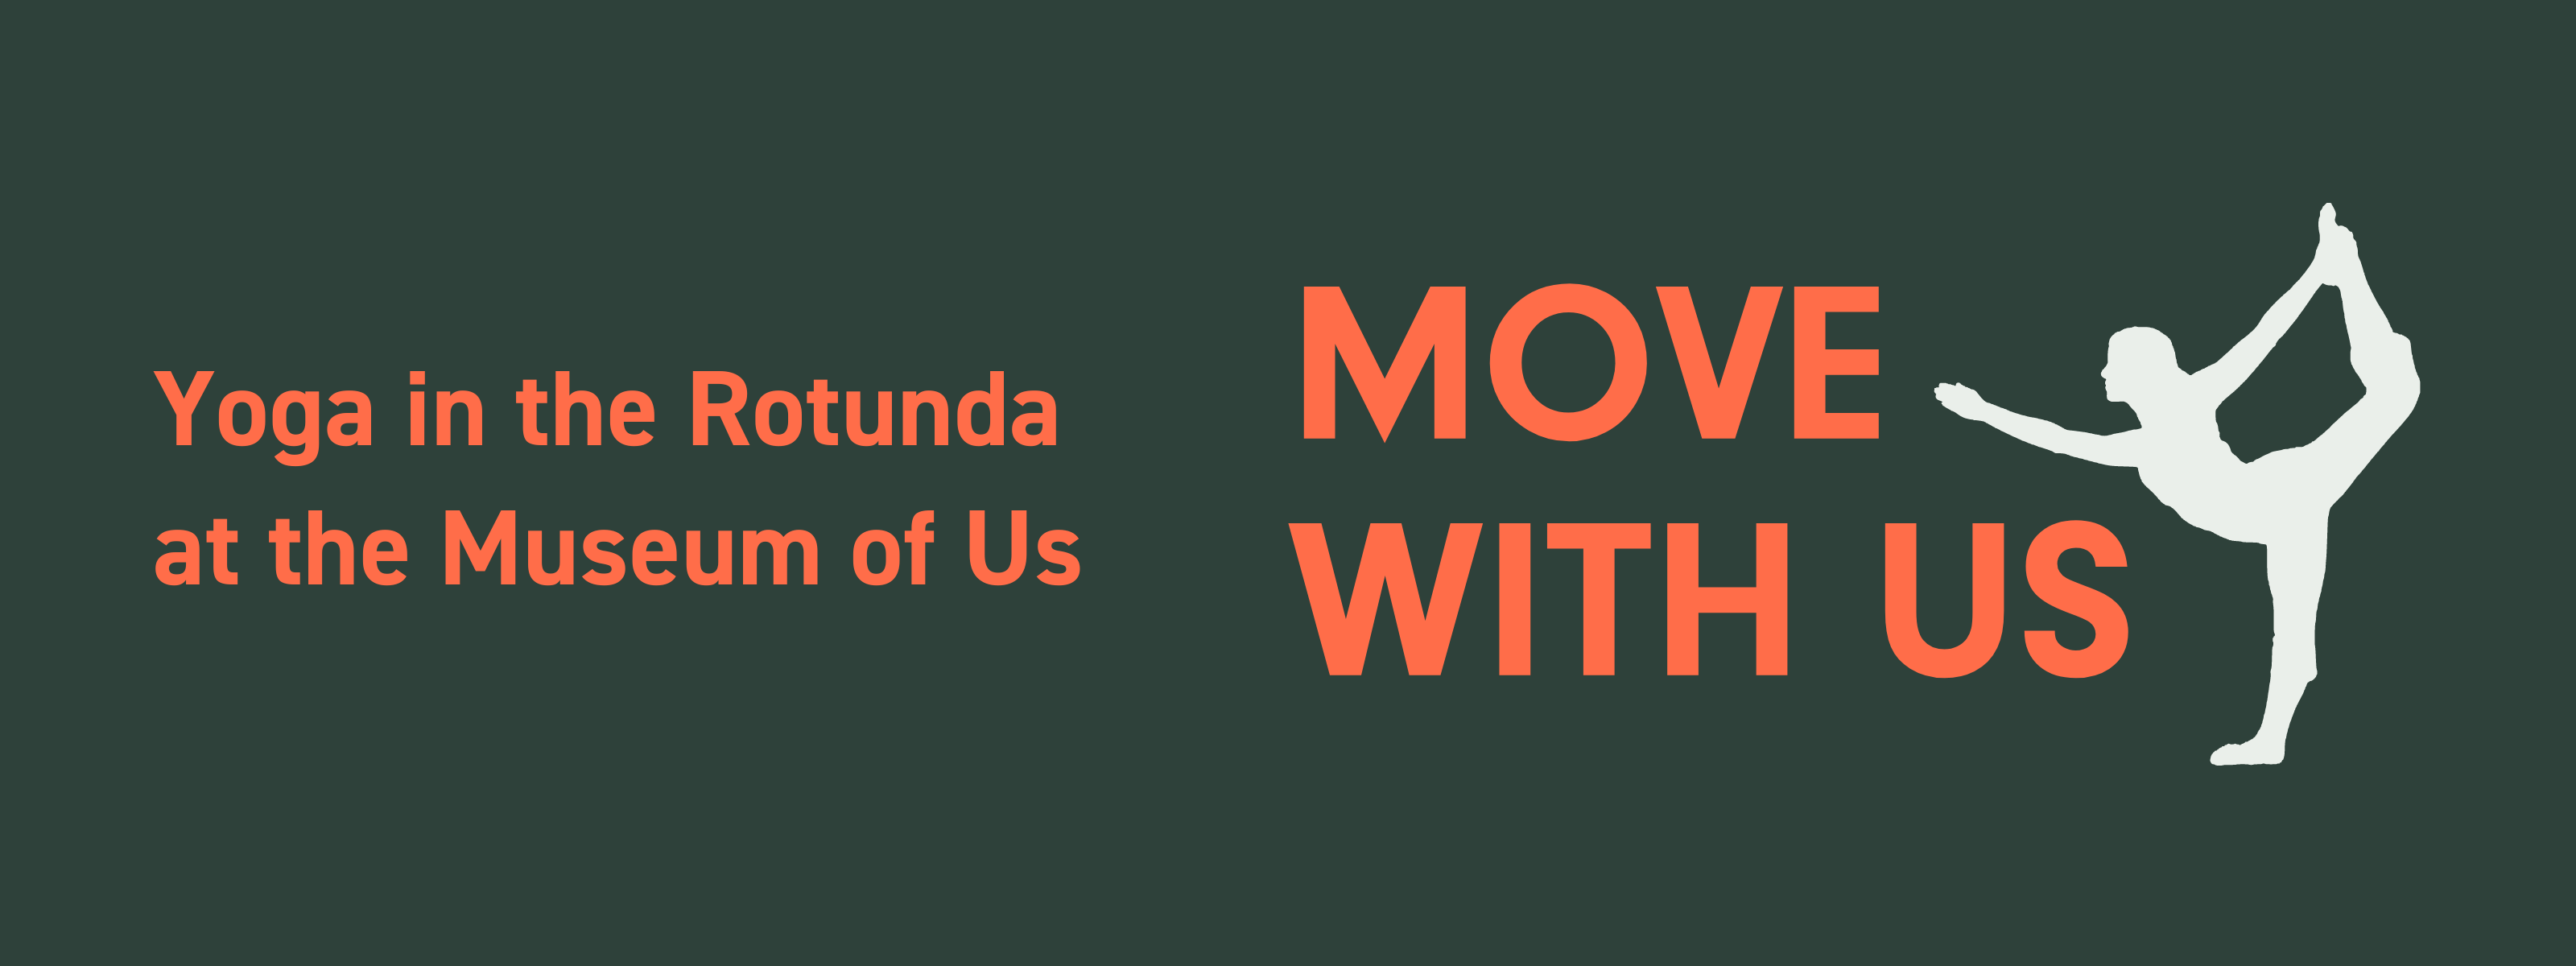 Dark gray graphic with green text that reads, "Move With Us, Yoga in the Rotunda at the Museum of Us" next to a white icon of a person doing a yoga pose.